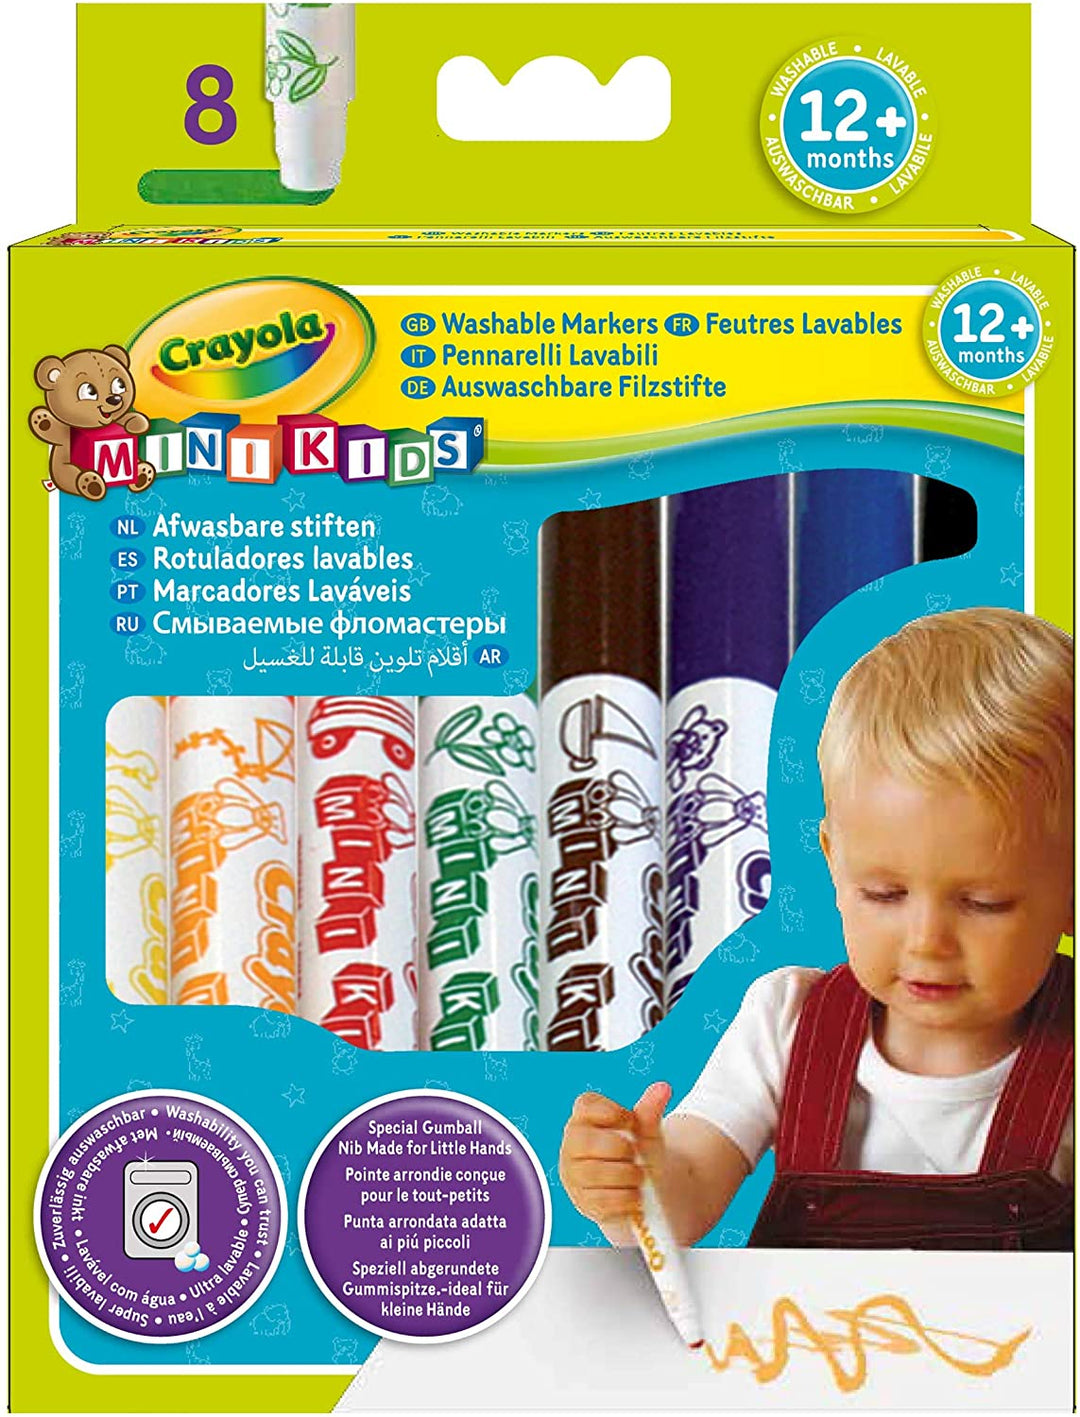 Crayola Beginnings First Markers (8 Pack)